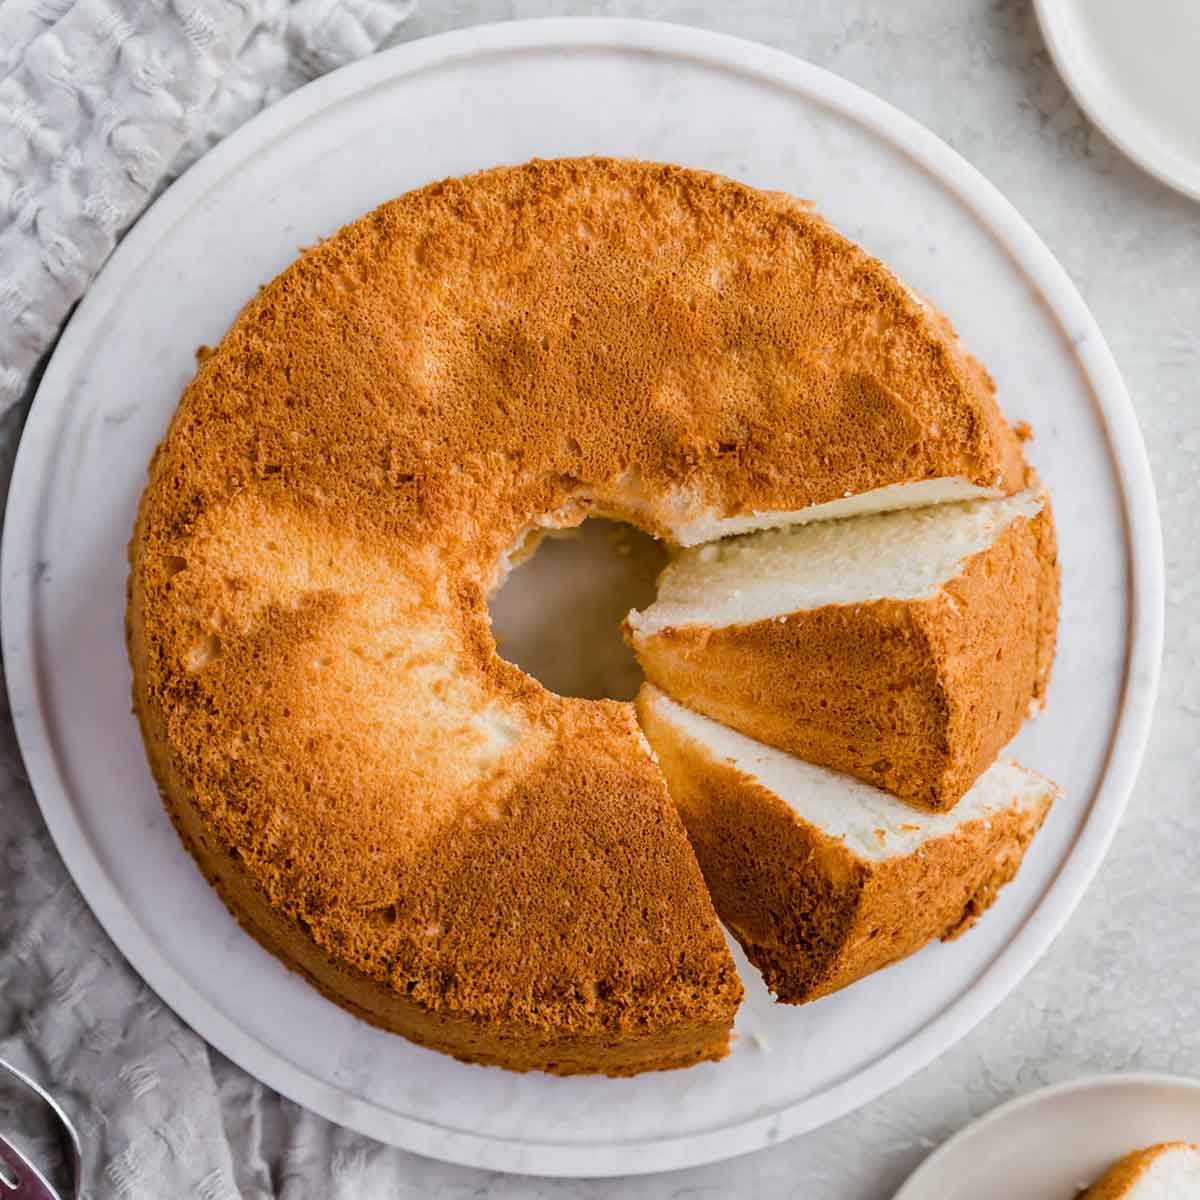 A baked angel food cake on a serving plate with two slices cut and laying on side.